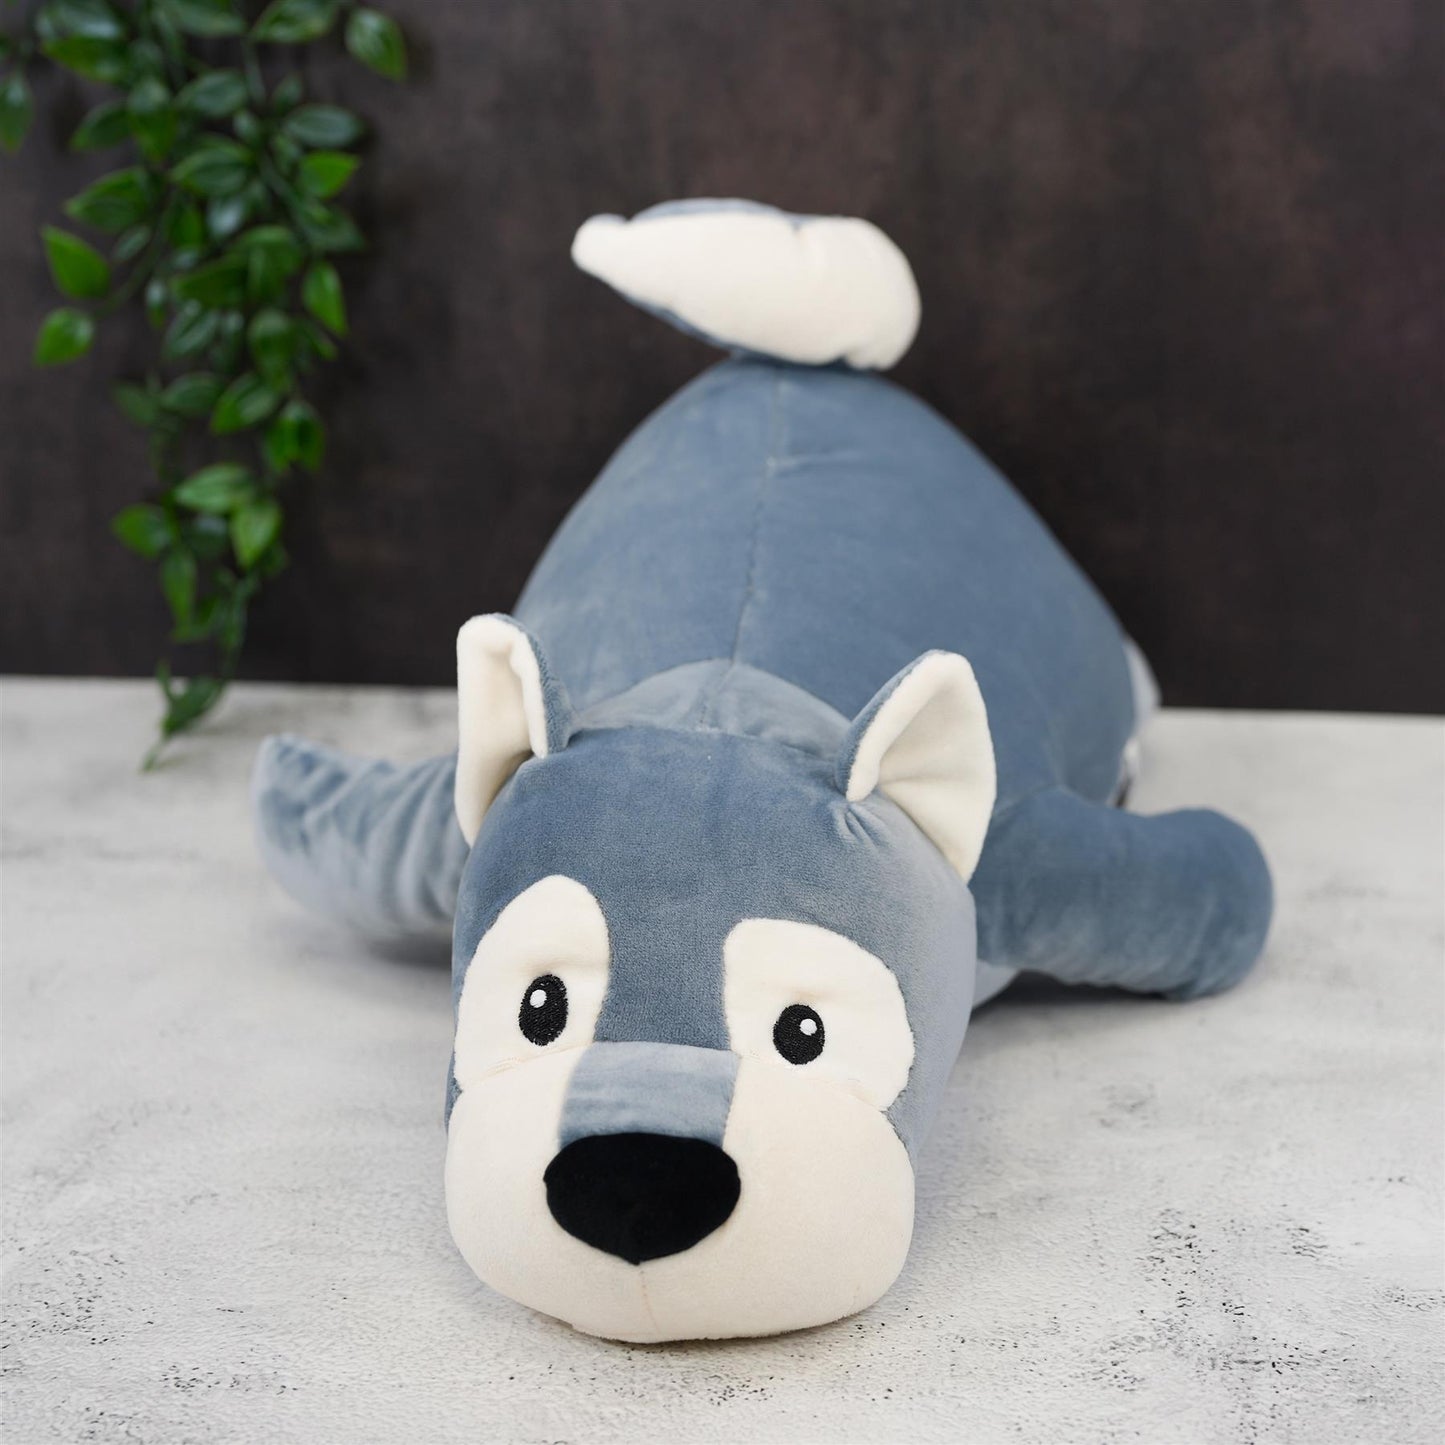 20” Super-Soft Wolf Plush Pillow Toy by The Magic Toy Shop - UKBuyZone